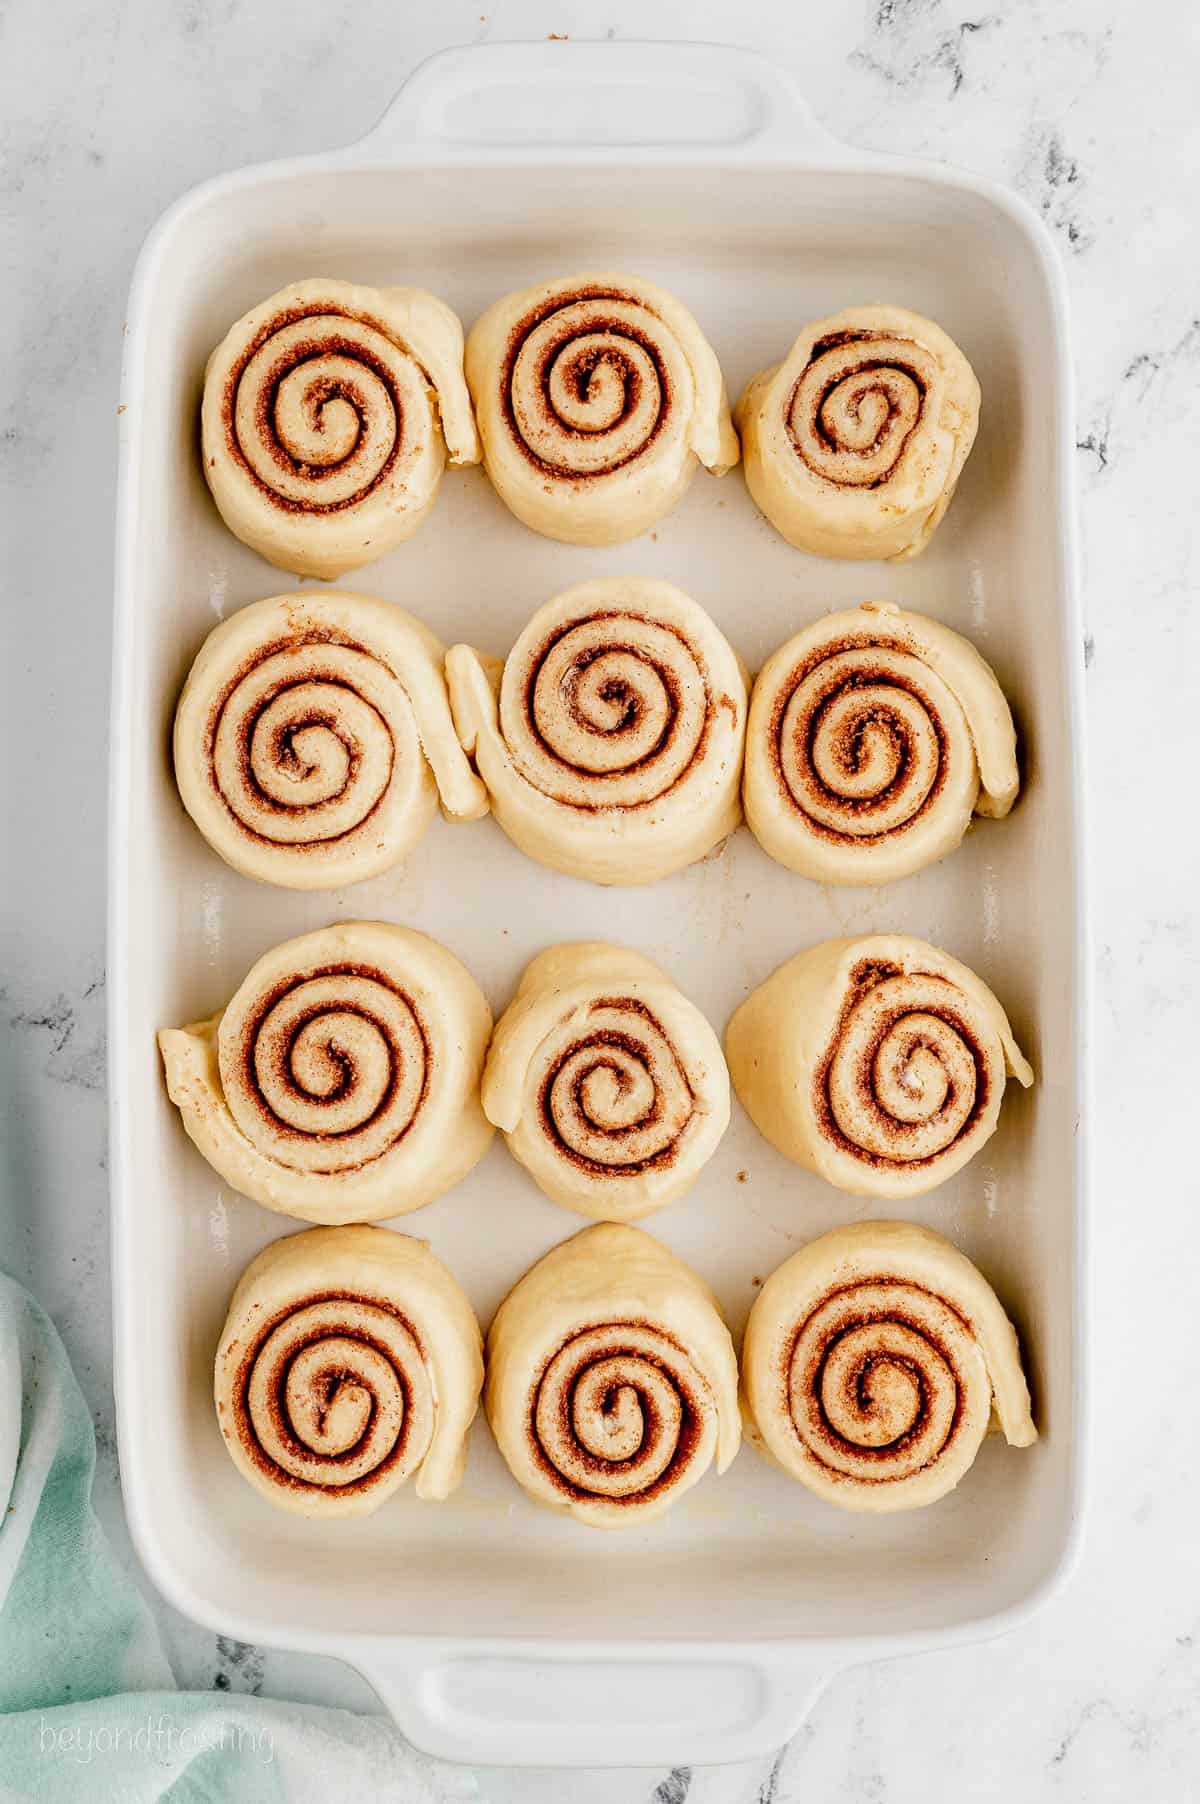 Cinnamon rolls after rising in a ceramic baking dish.